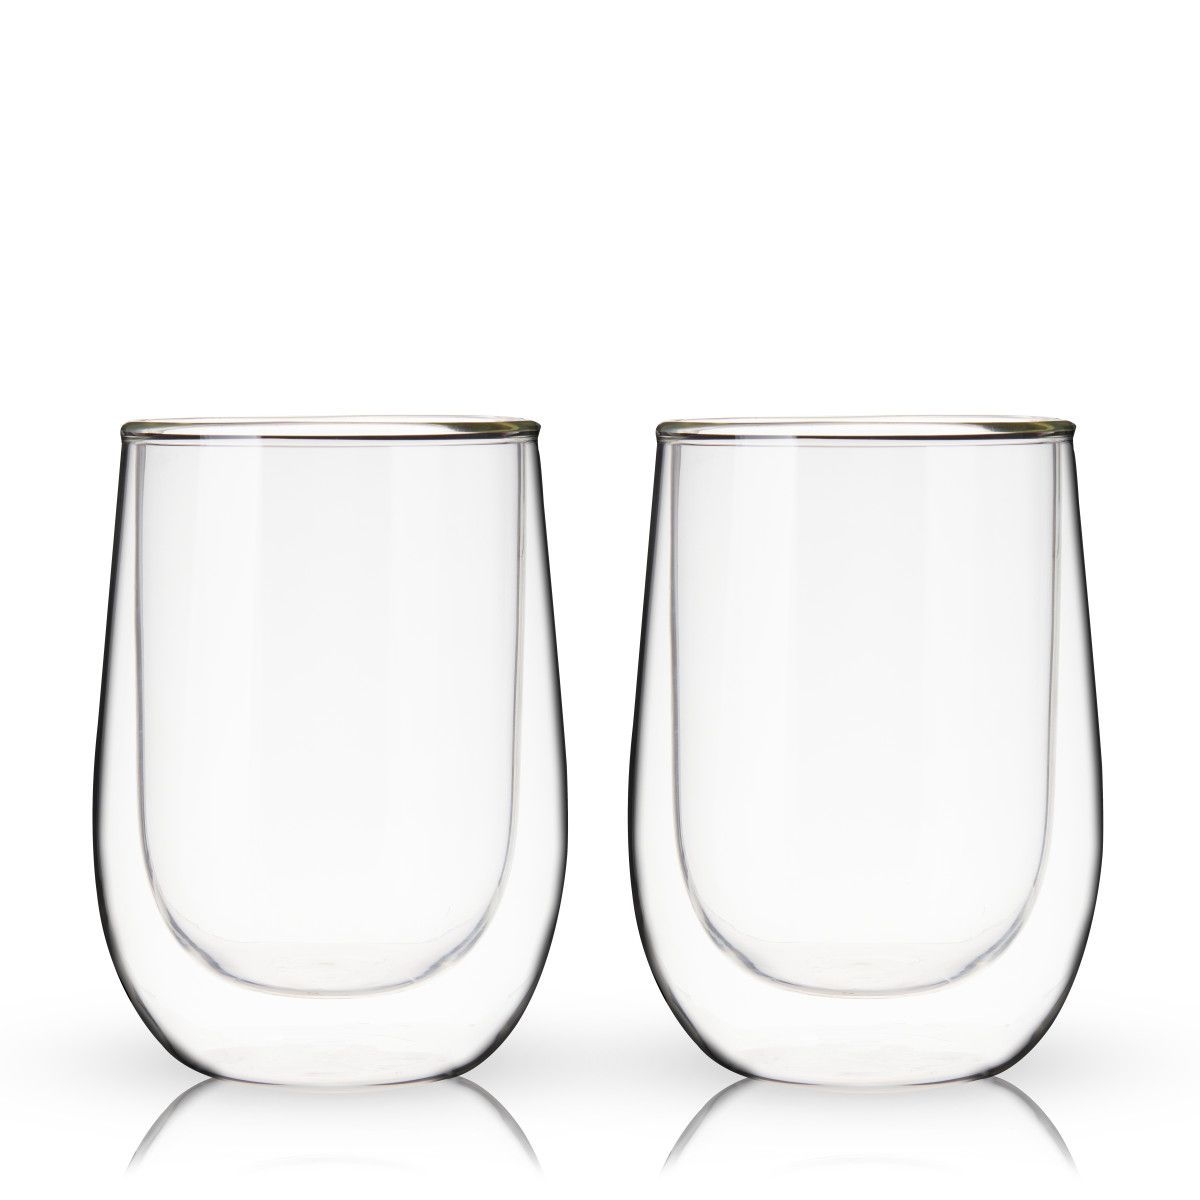 TRUE Double Walled Wine Glasses, Set of 2 - lily & onyx